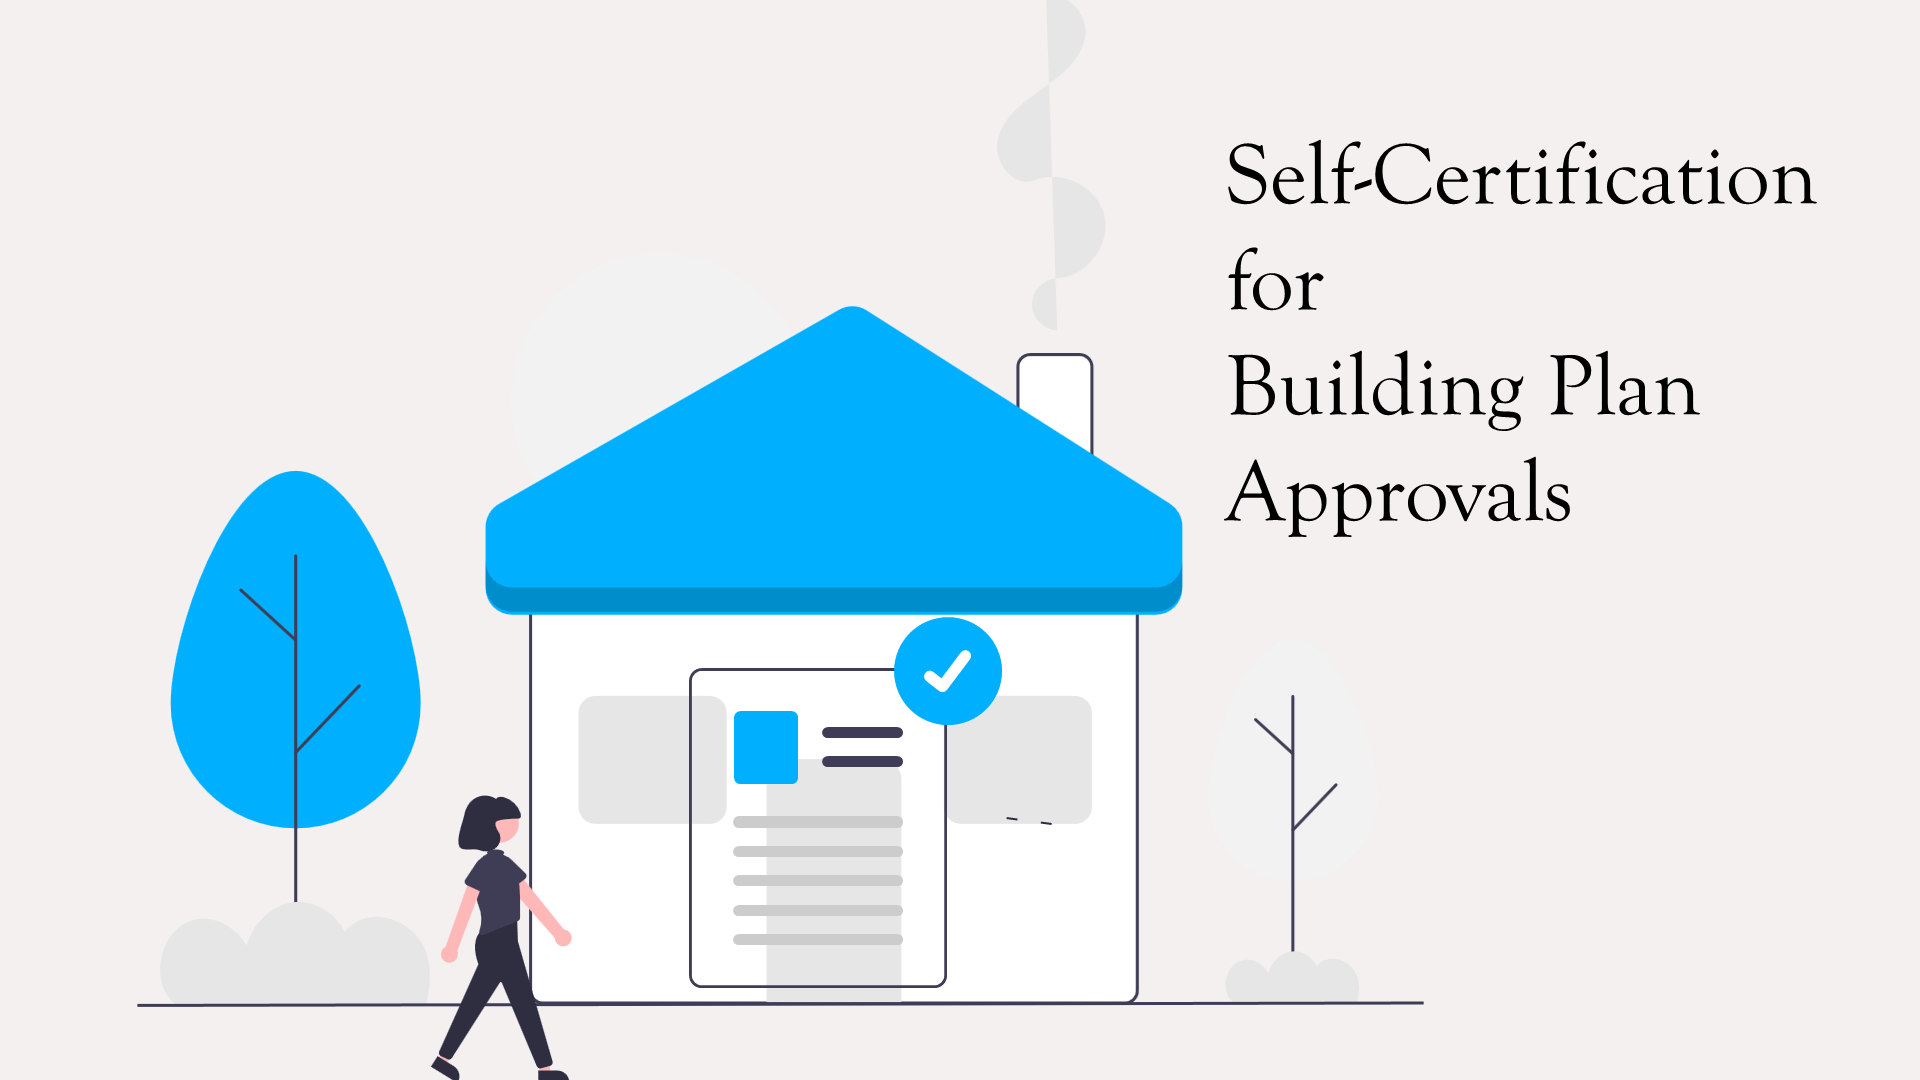 Self-Certification Scheme for Building Plan Approval in Tamil Nadu: An Introduction